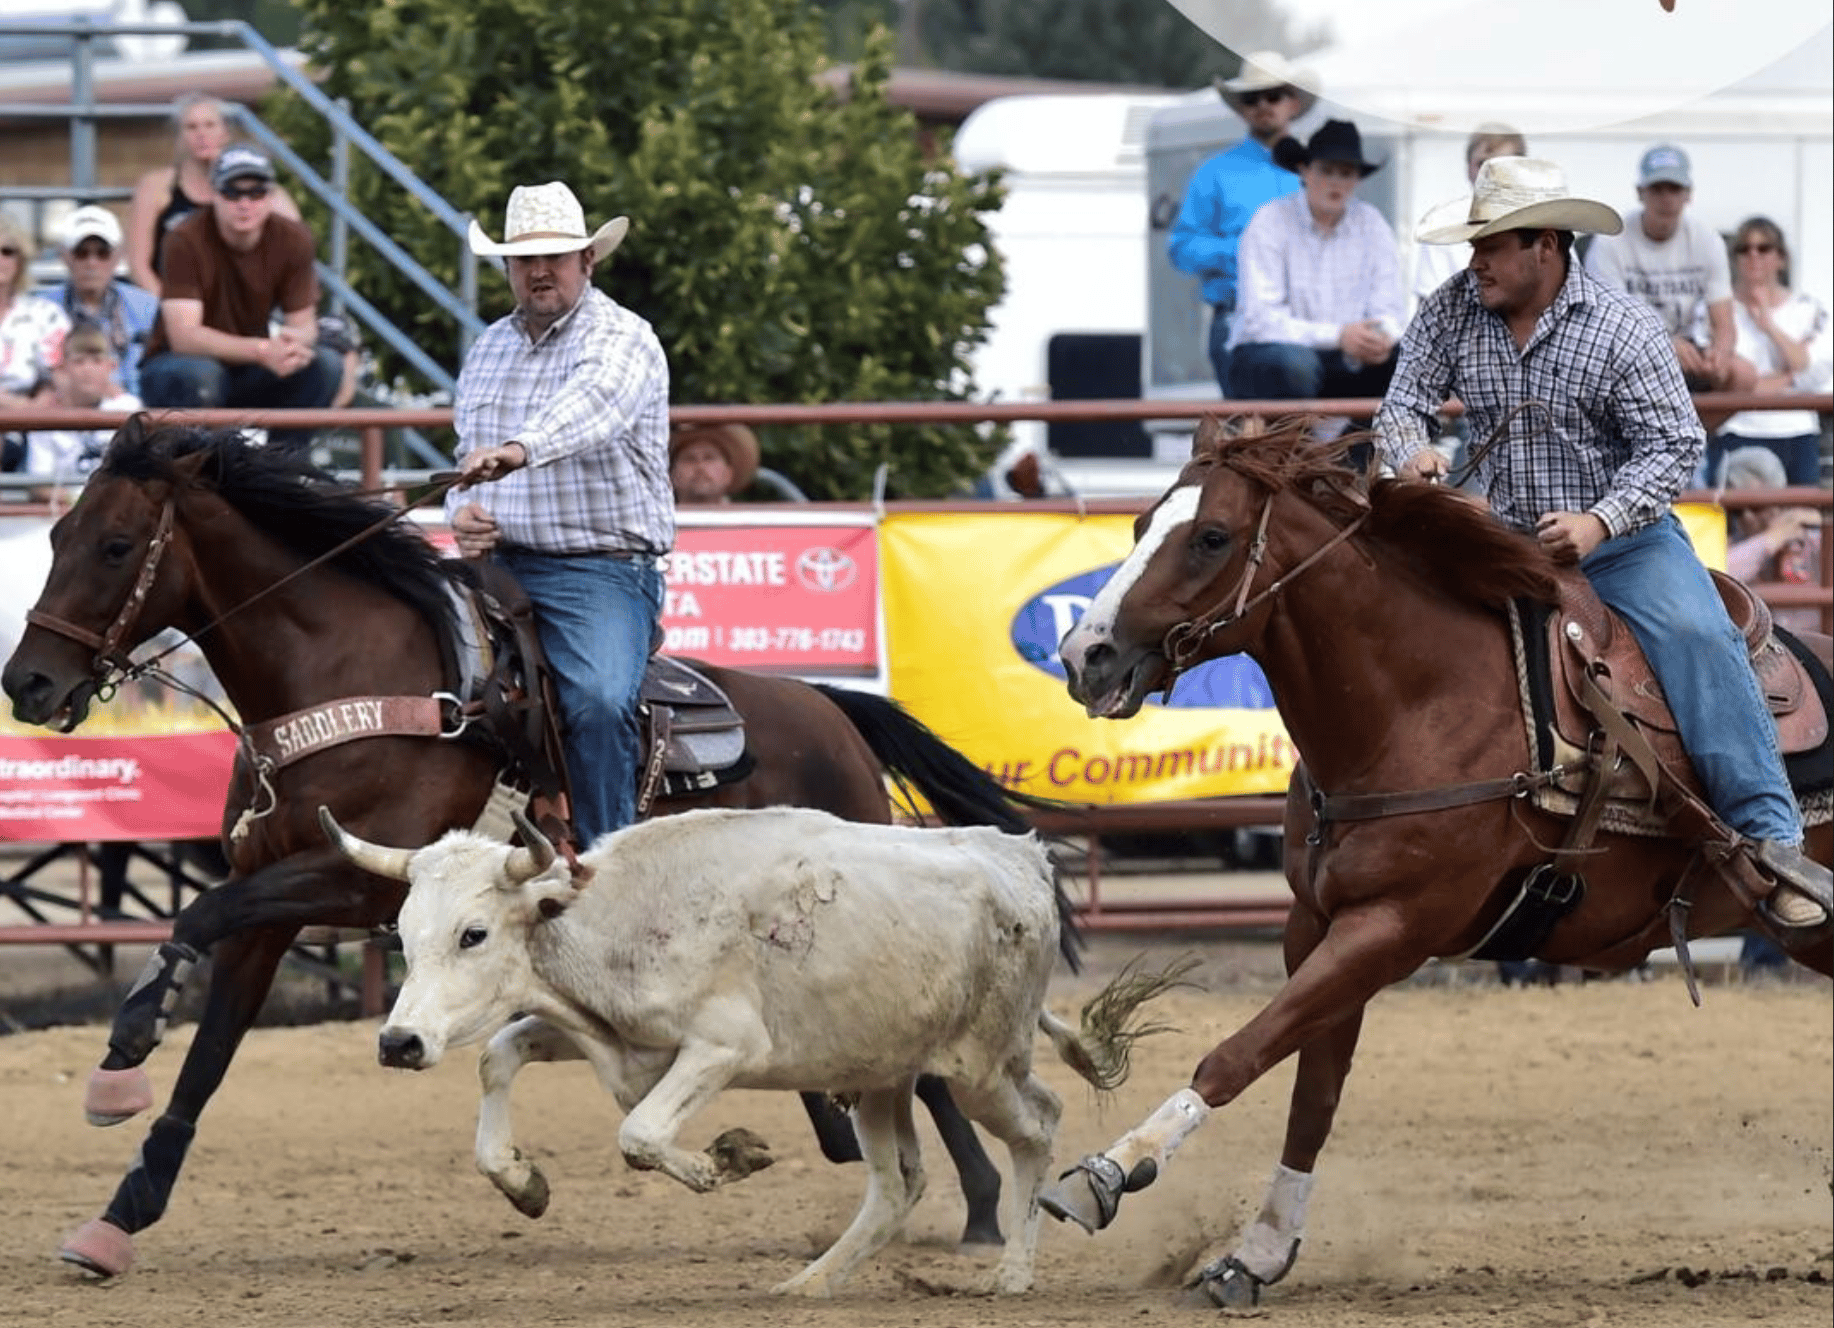 Two cowboys on horses chase a calf to rope it